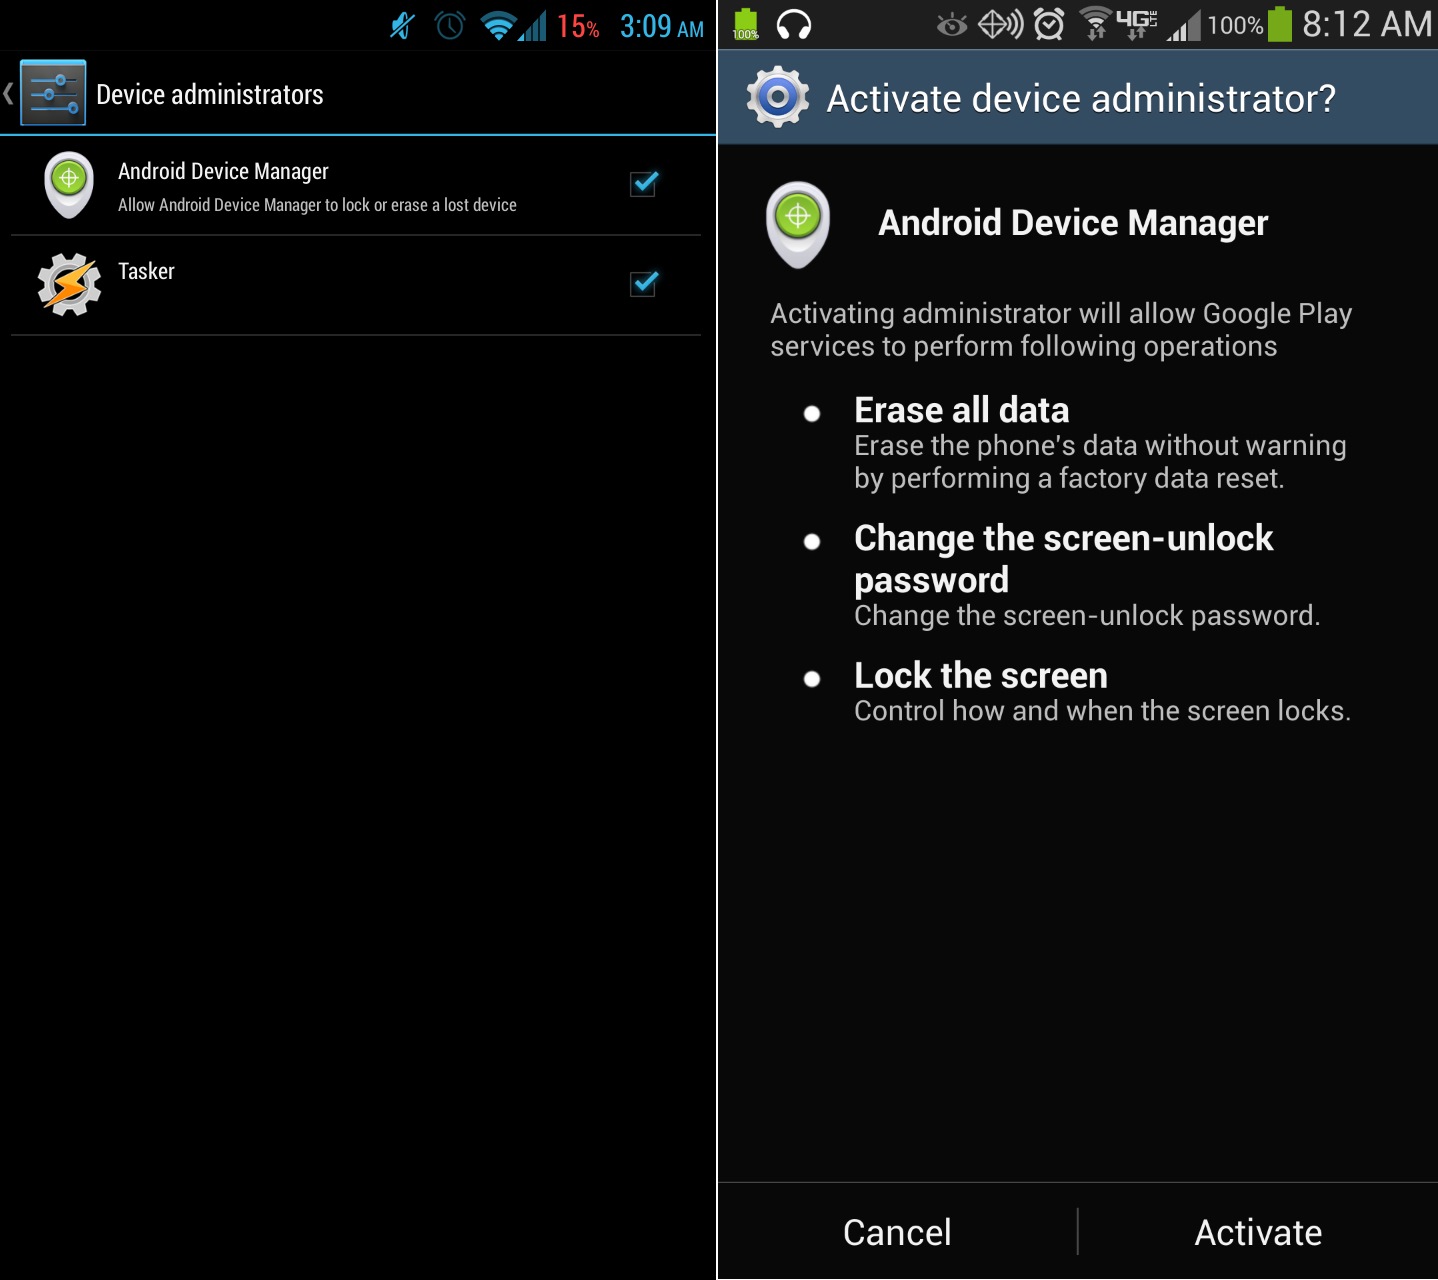 android device manager rollout